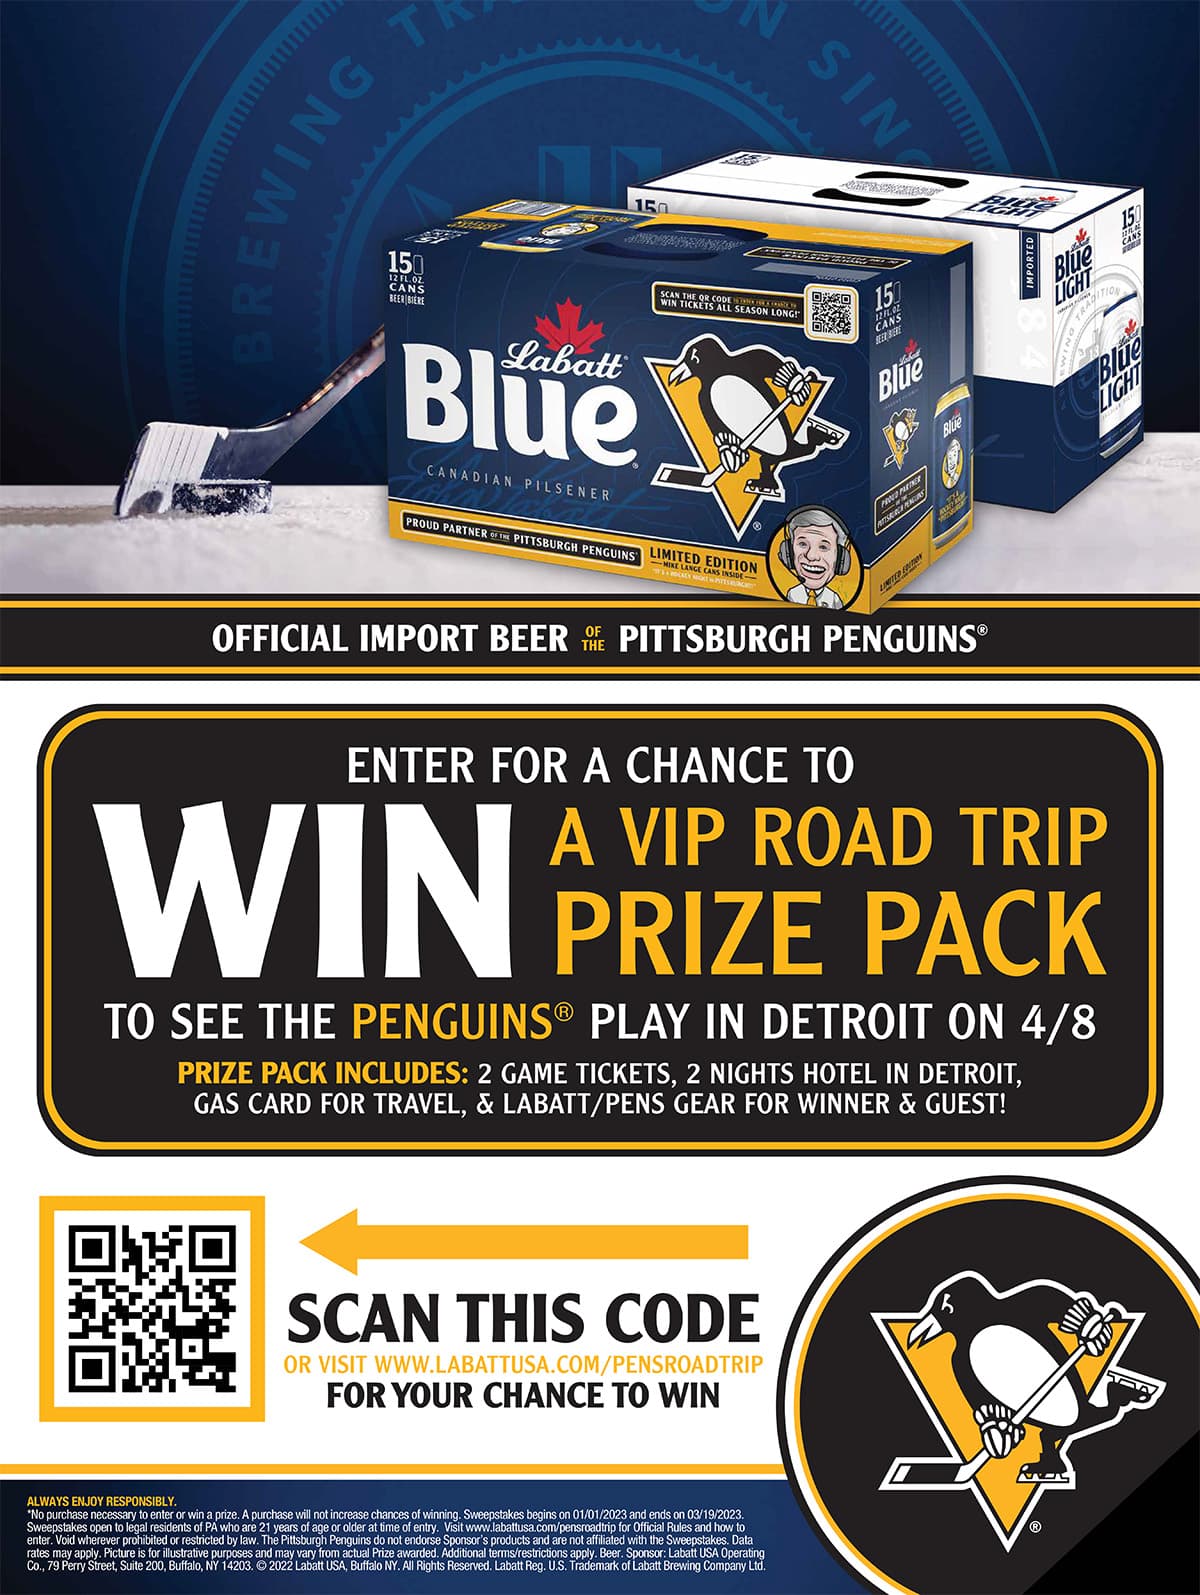 Hotel Accomodations for 2, one $100 gas card, and 2 tickets to see the Pittsburgh Penguins at the Detroit Redwings game